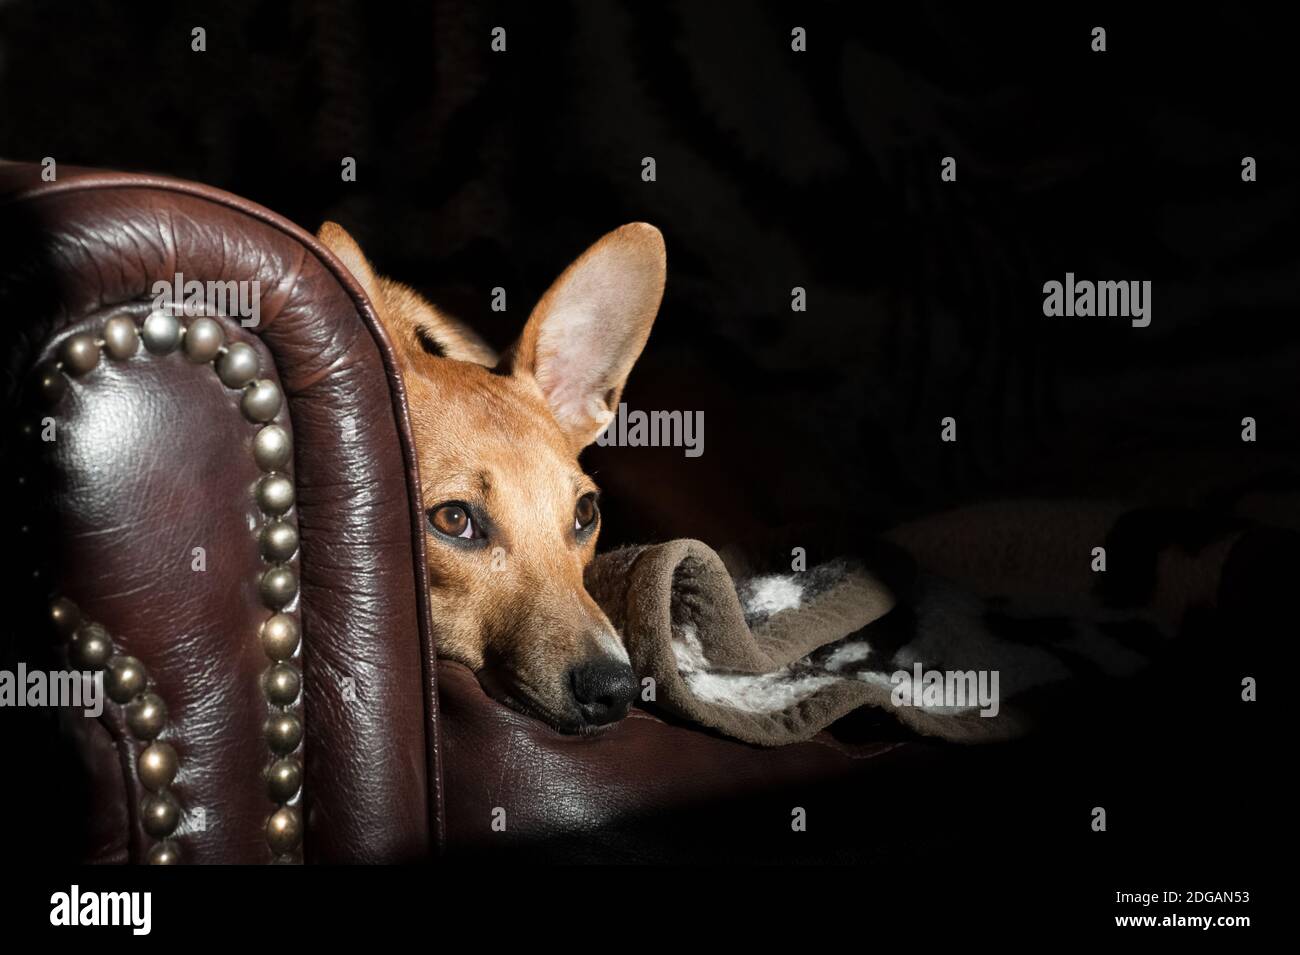 wide-eyed dog with big ears on a leather sofa with copy-space Stock Photo